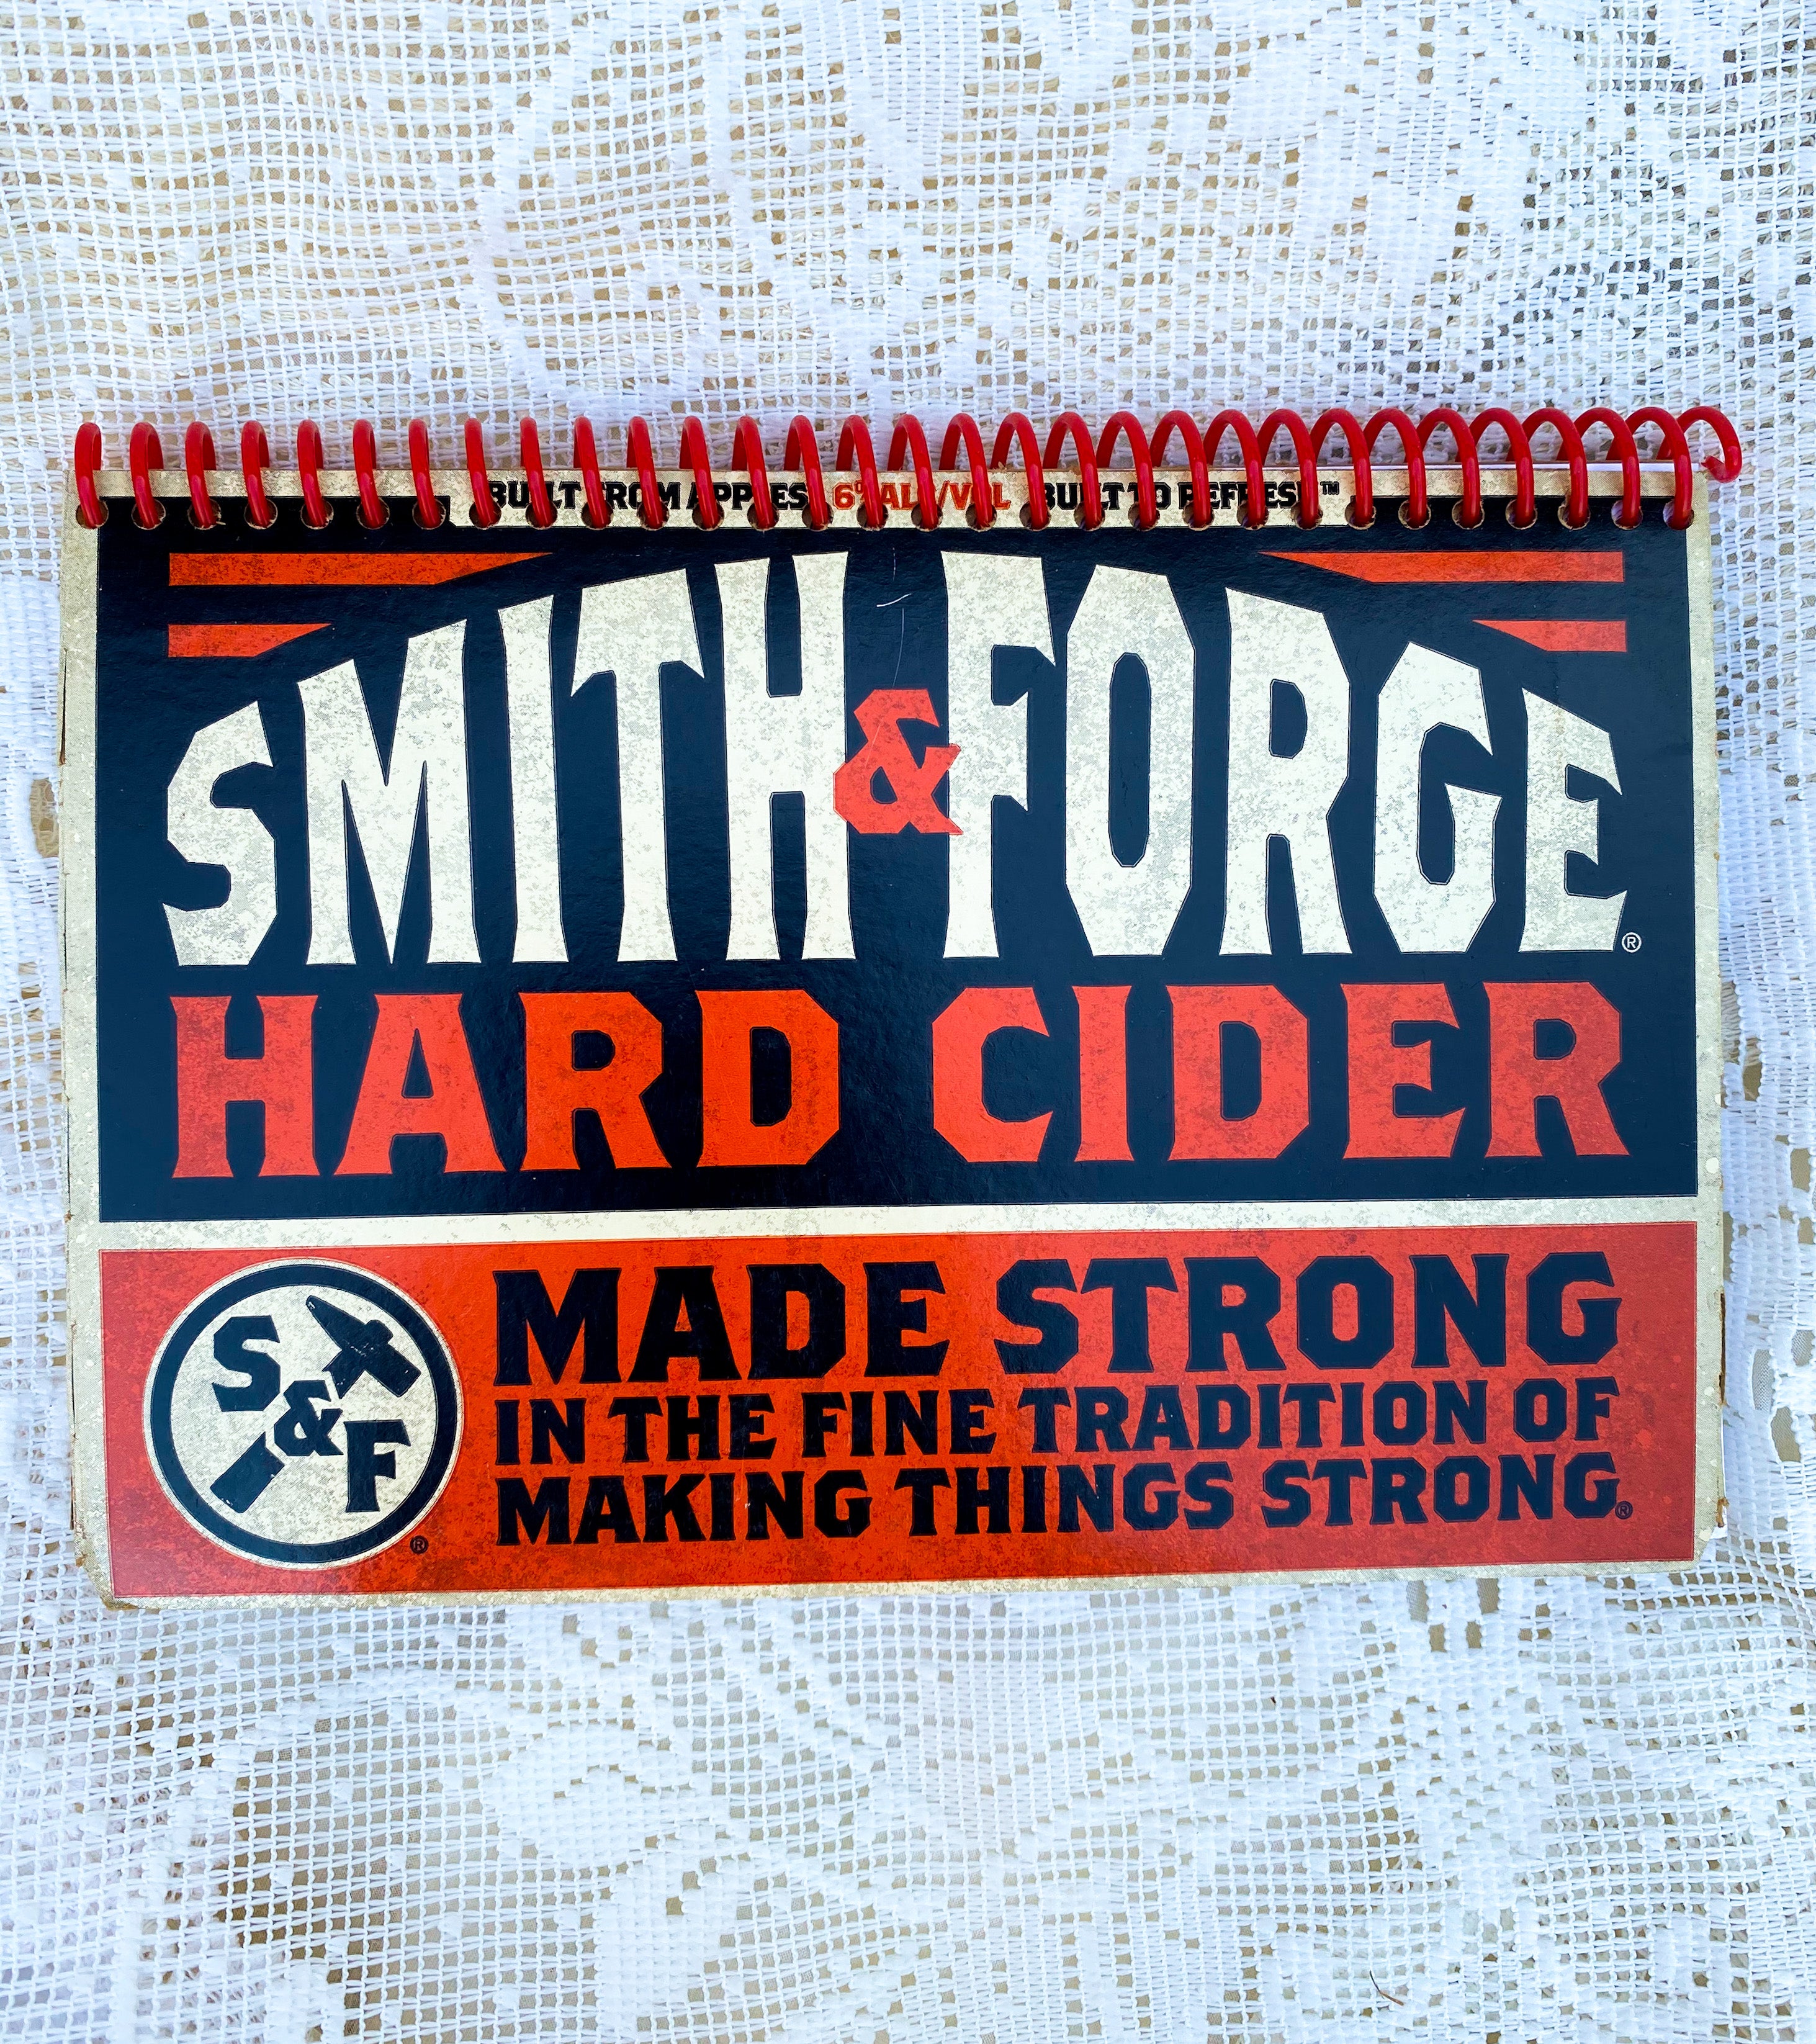 Smith & Forge Hard Cider Recycled Beer Carton Notebook